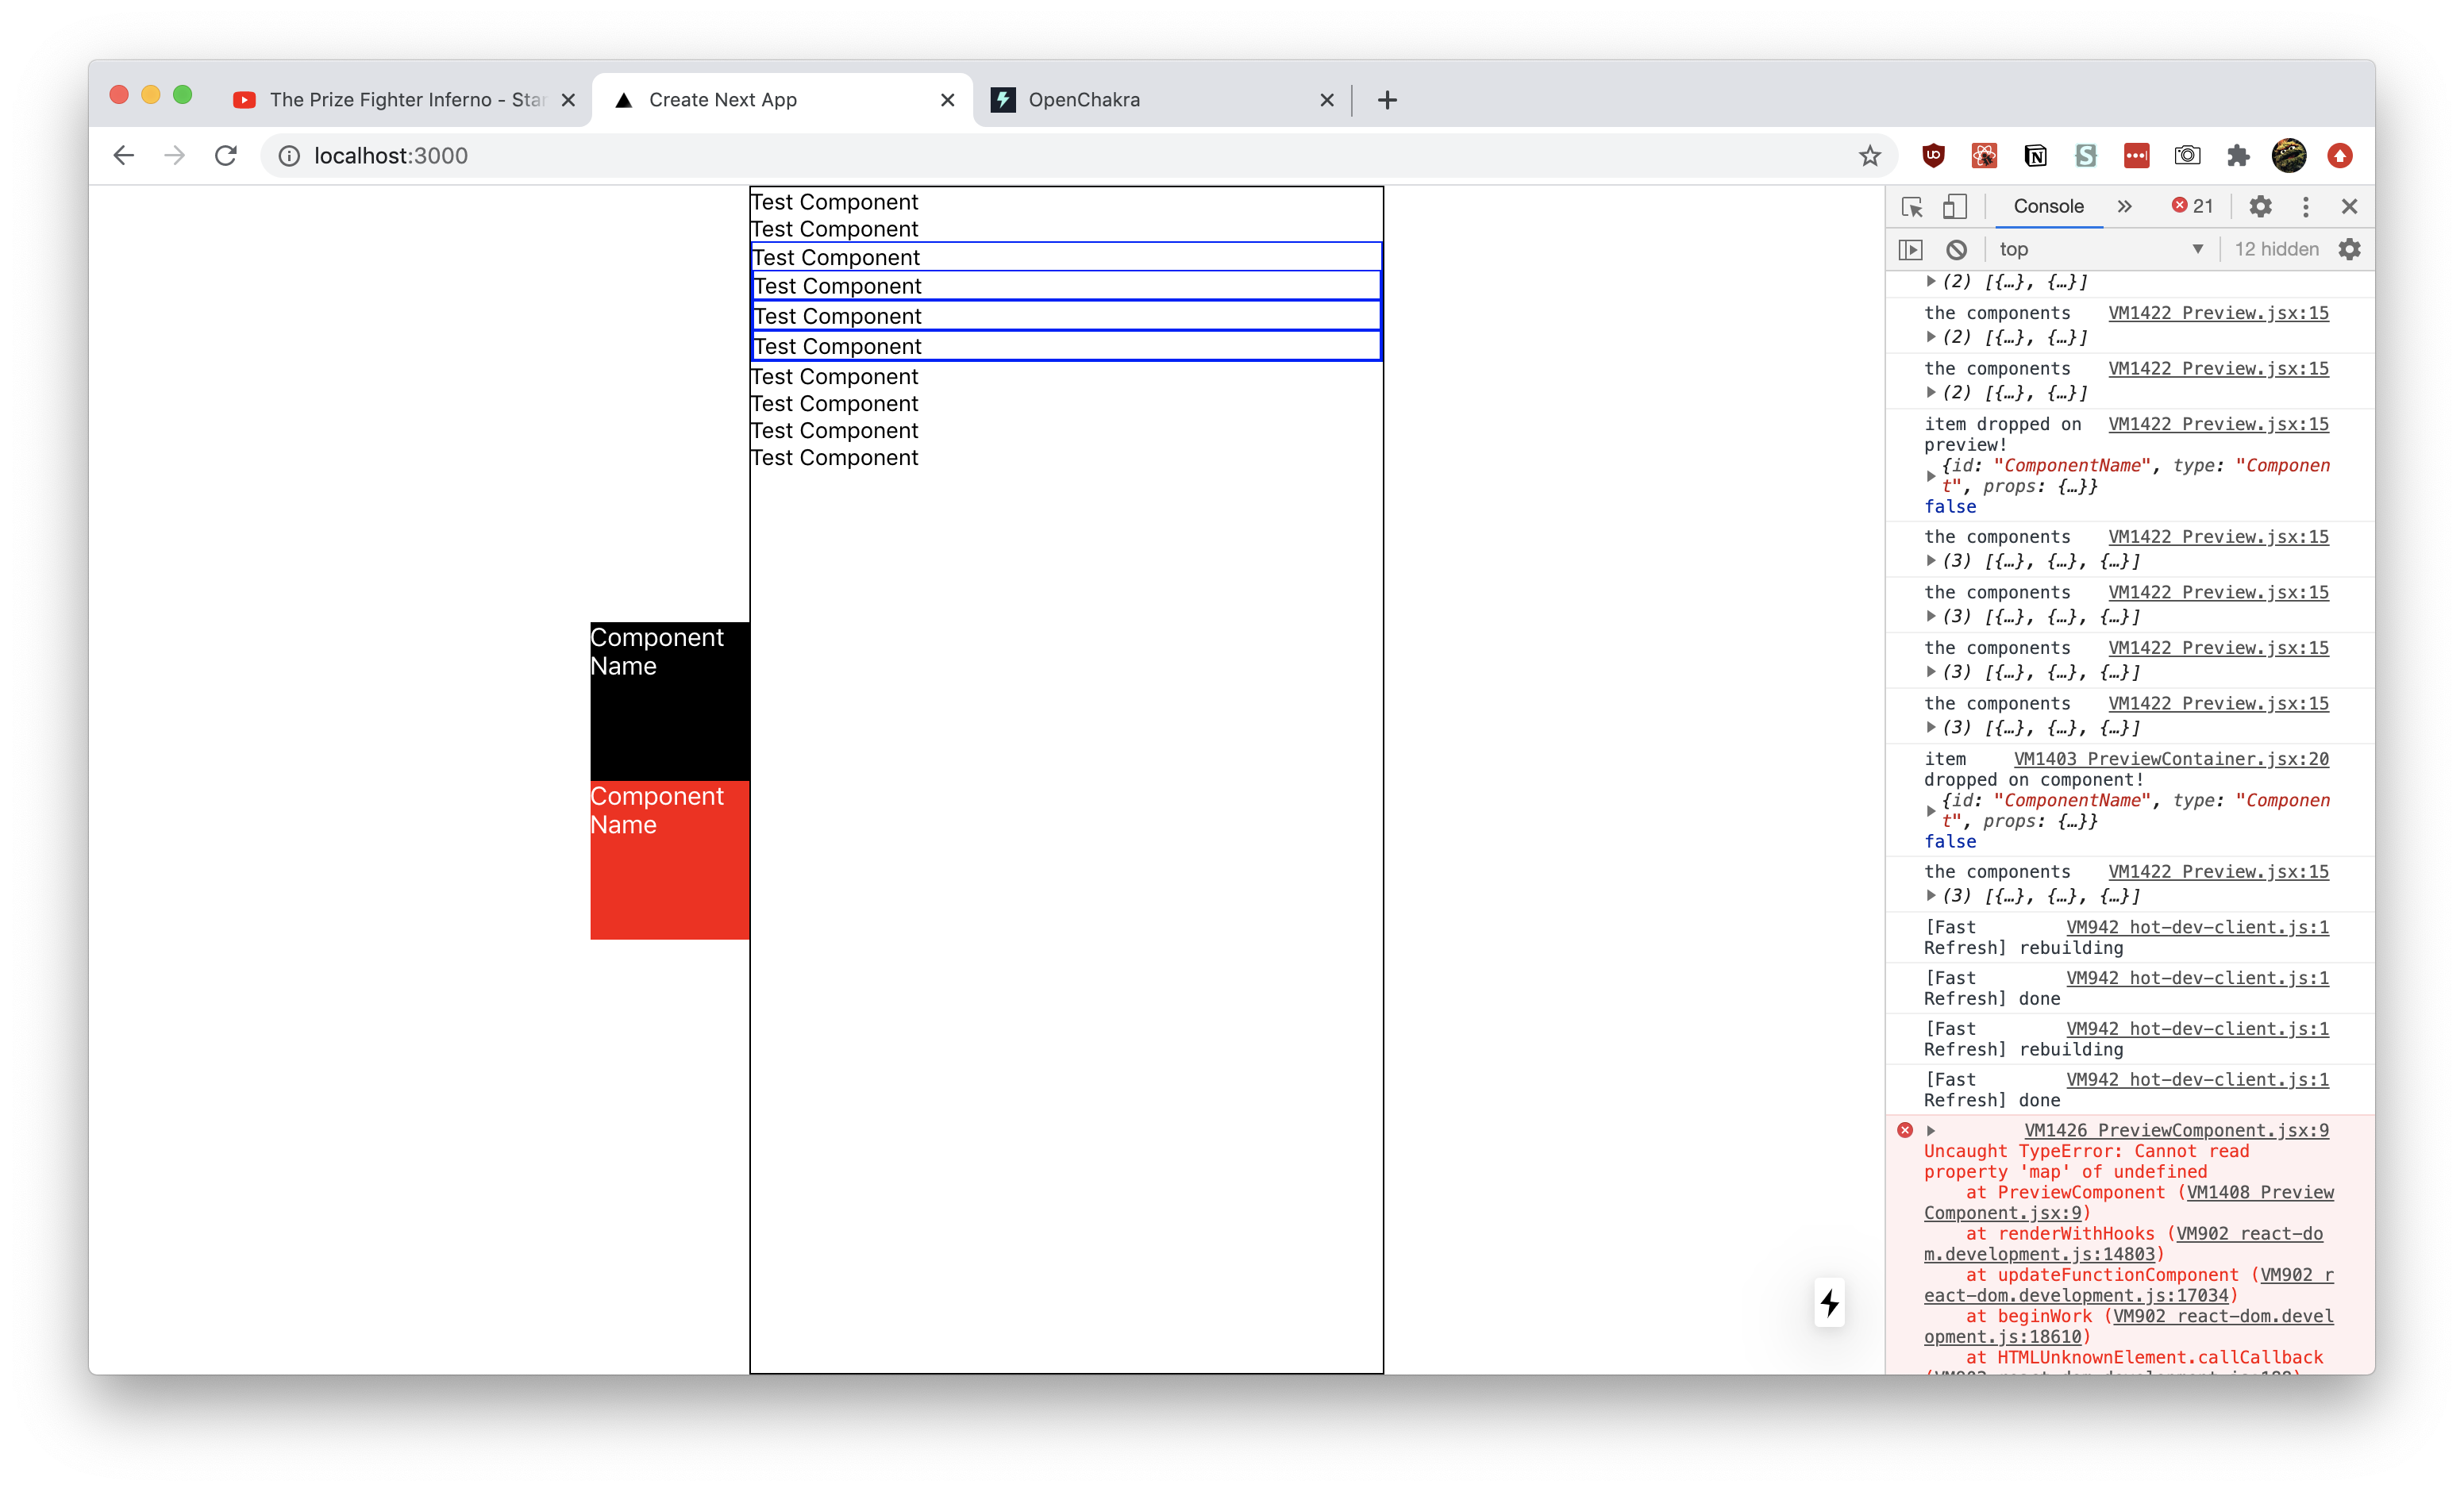 Screenshot of the Design System Builder in action